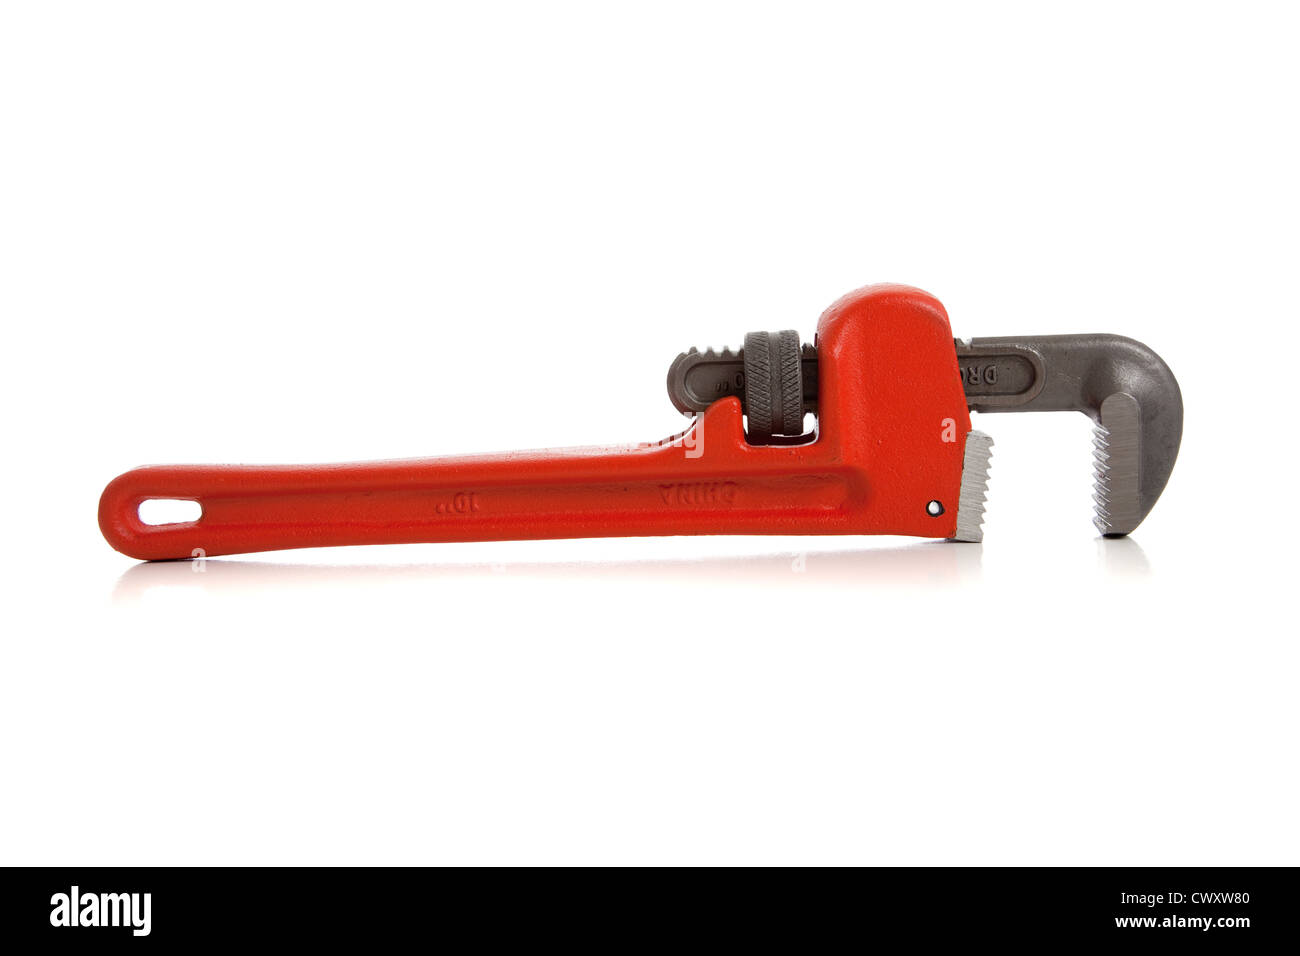 A red pipe wrench on a white background Stock Photo